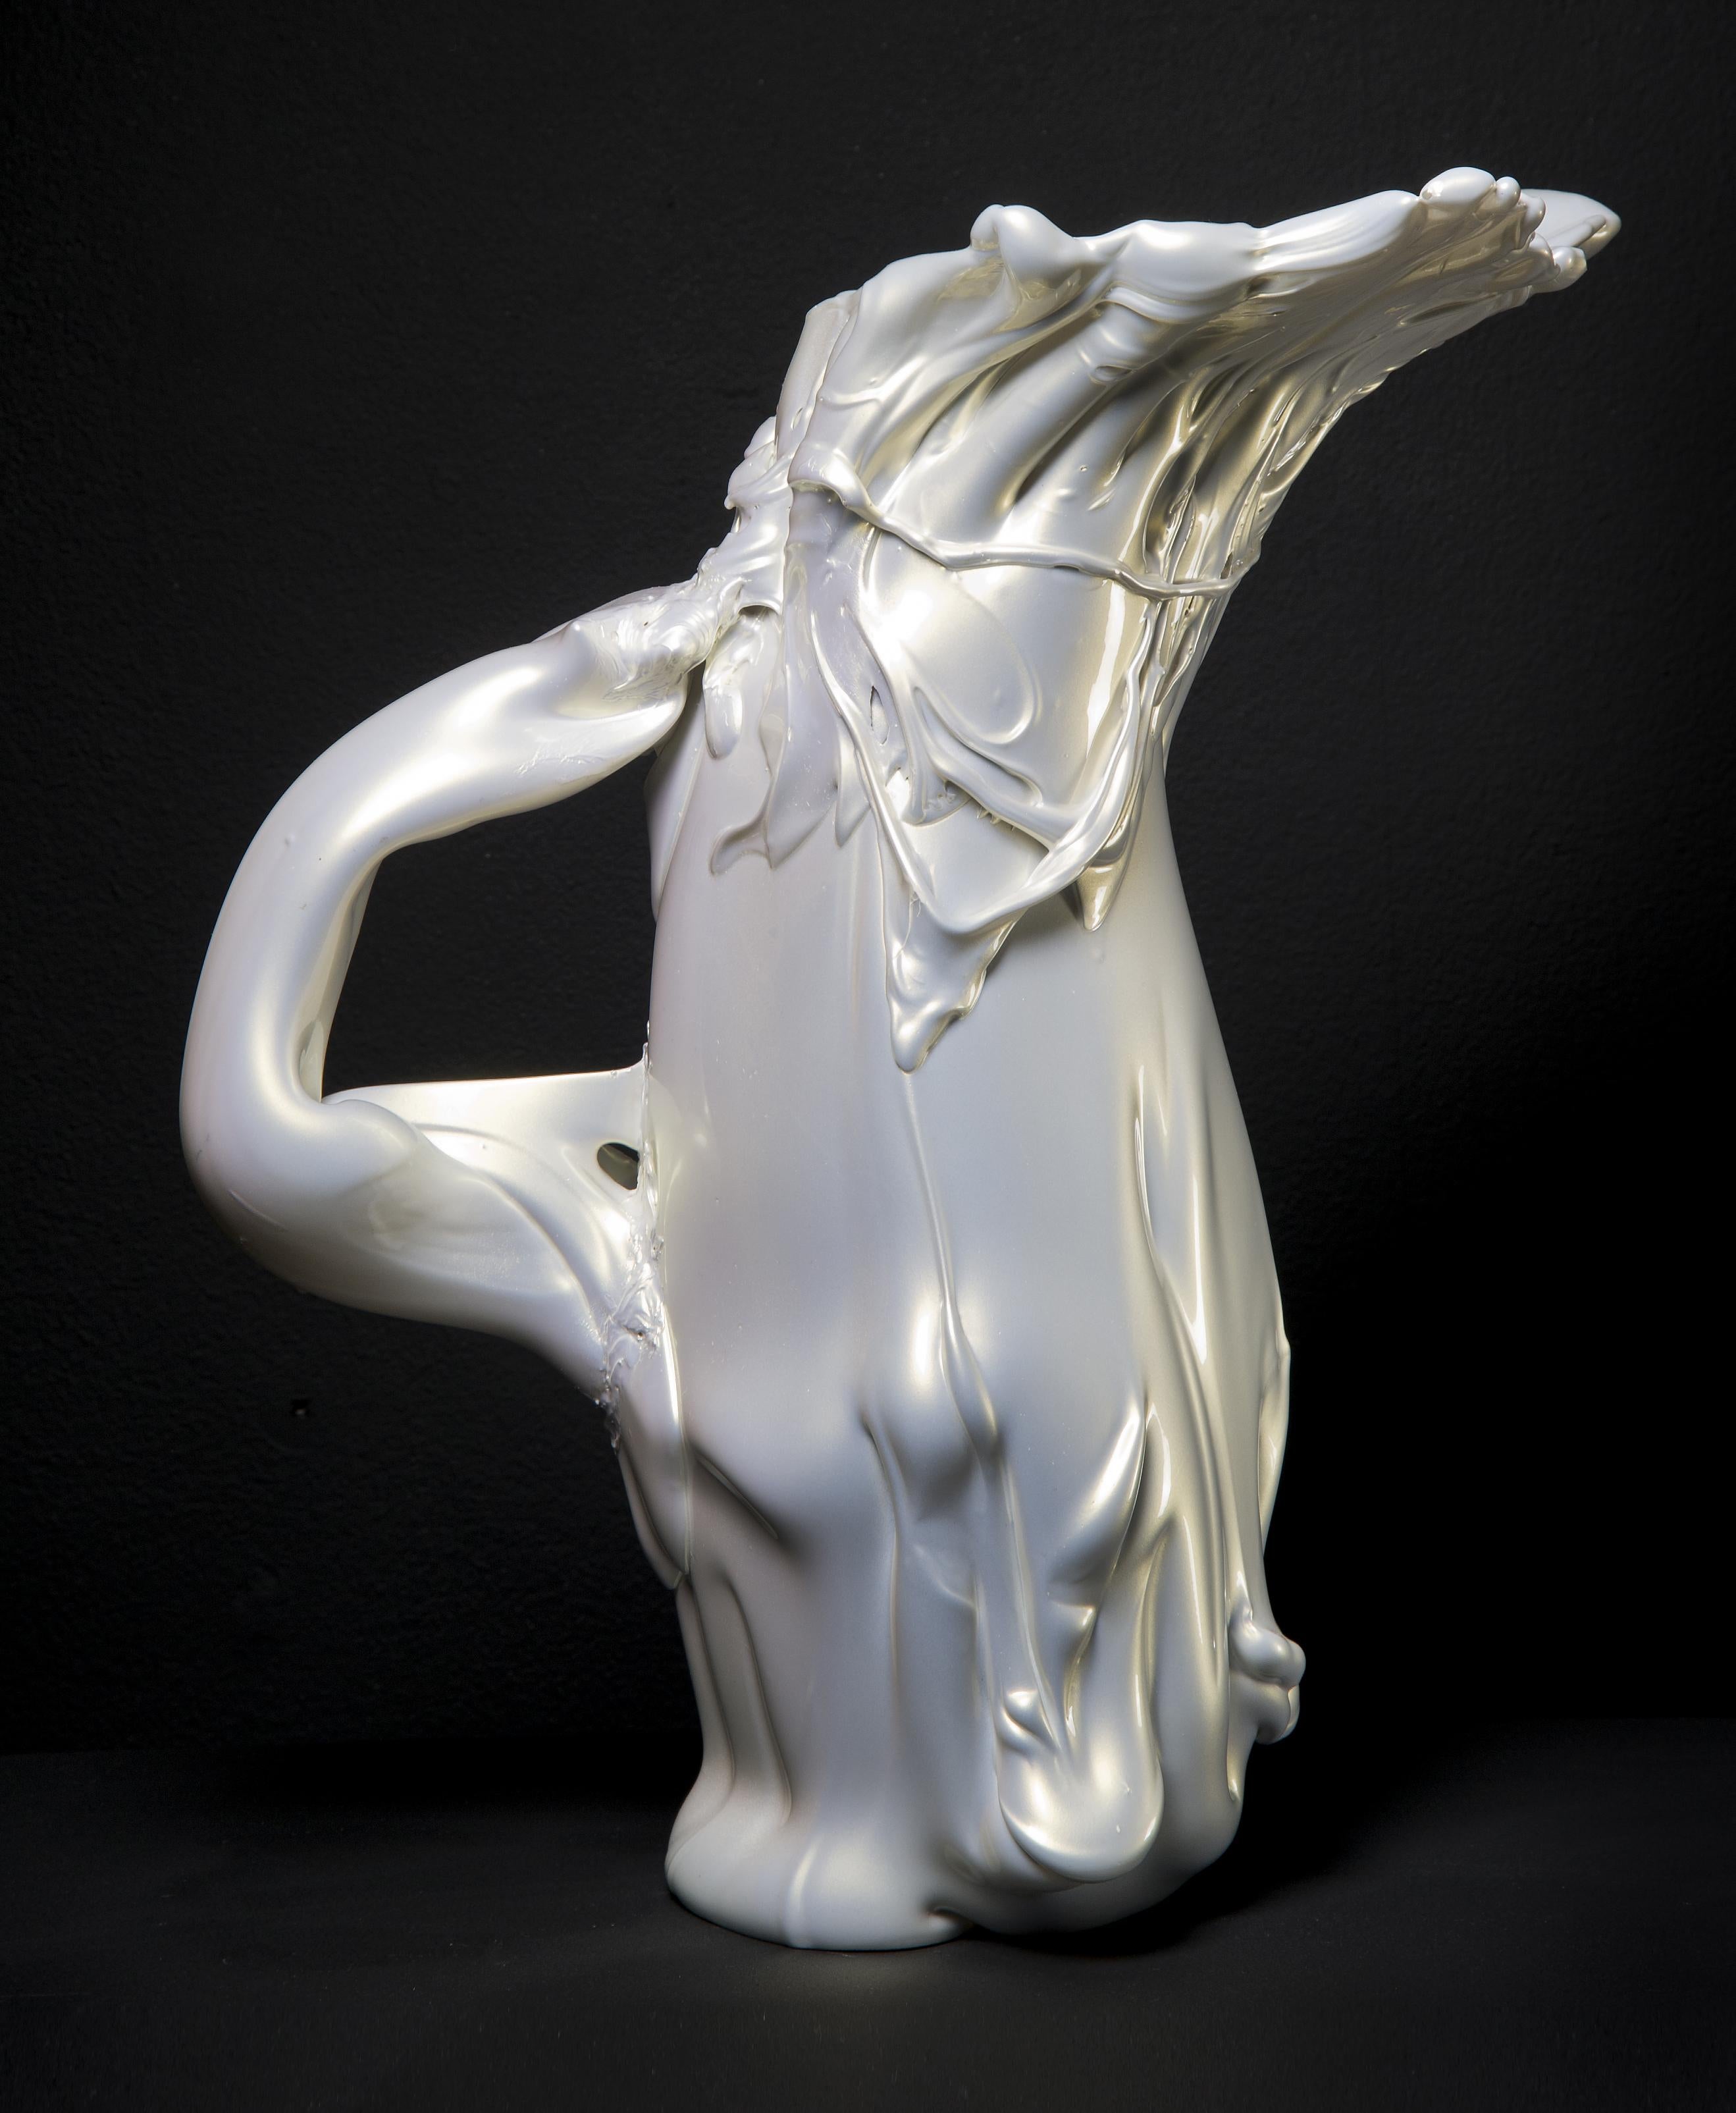 The White Pearl Pitcher II is a unique white glass sculpture with a lustrous finish by the Swedish artist Fredrik Nielsen. The artist literally freehand sculpts his glass to create these monumental artworks. This piece has been finished with car